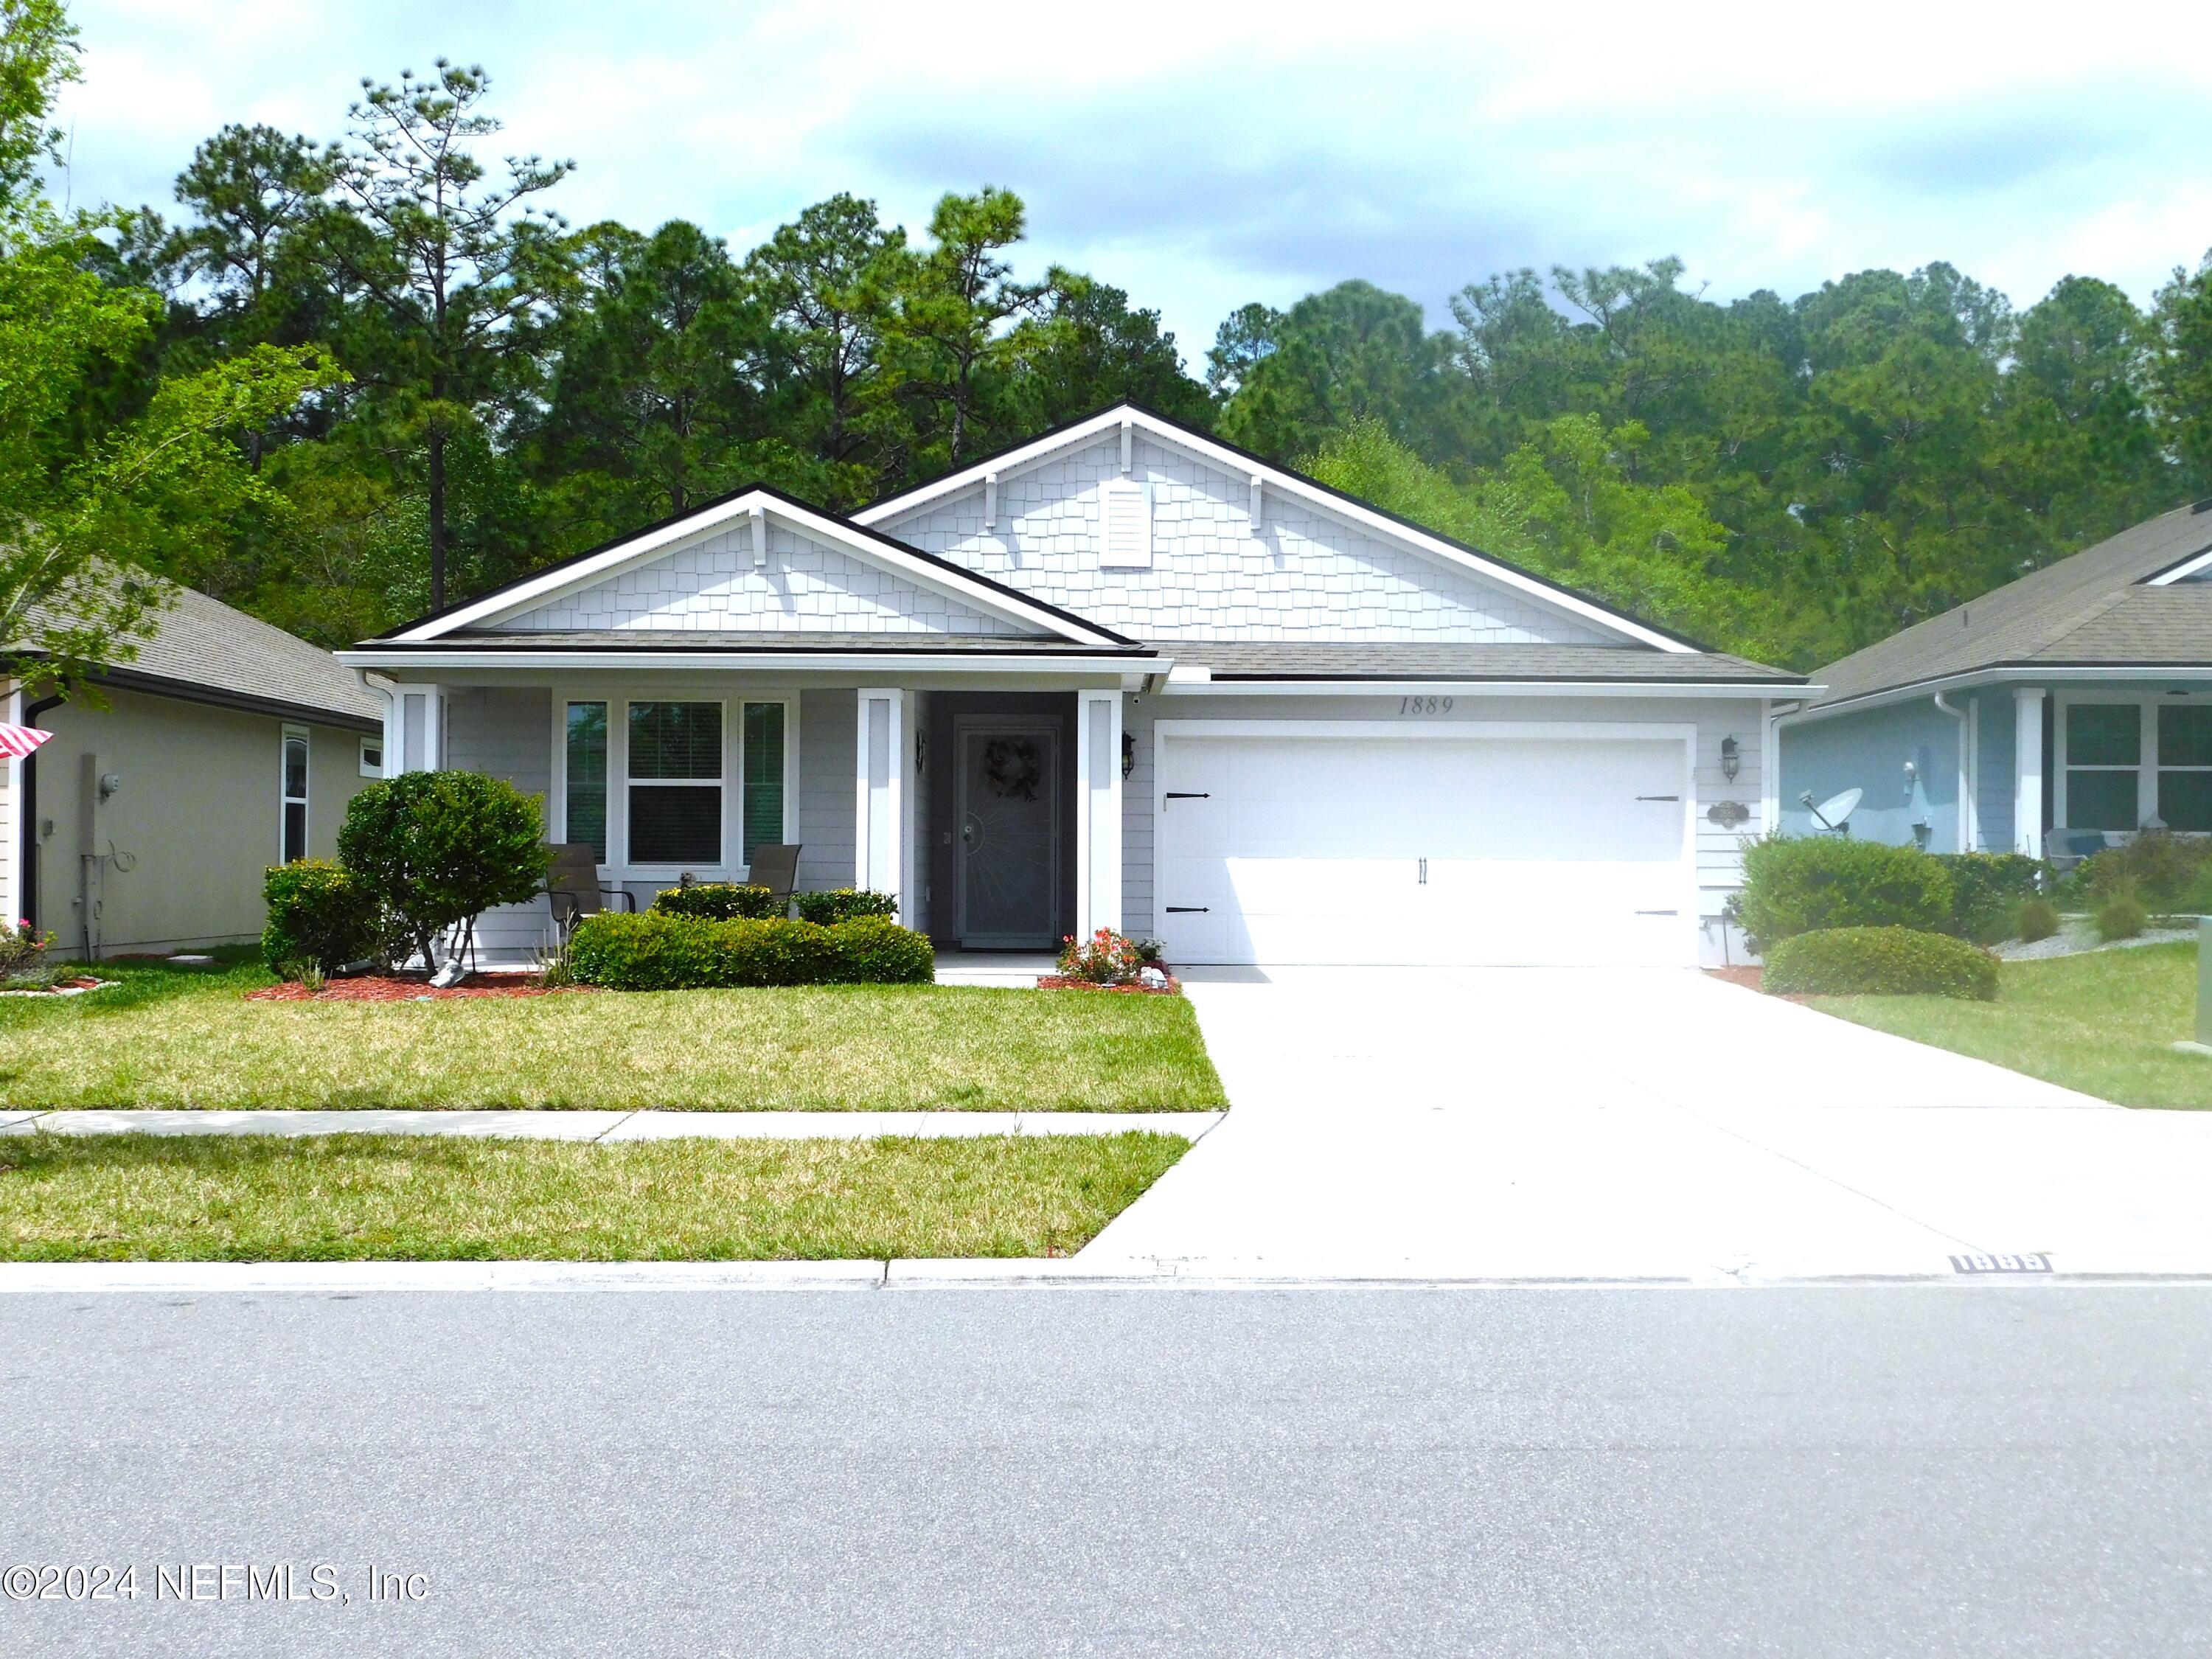 Middleburg, FL home for sale located at 1889 SAGE CREEK Place, Middleburg, FL 32068